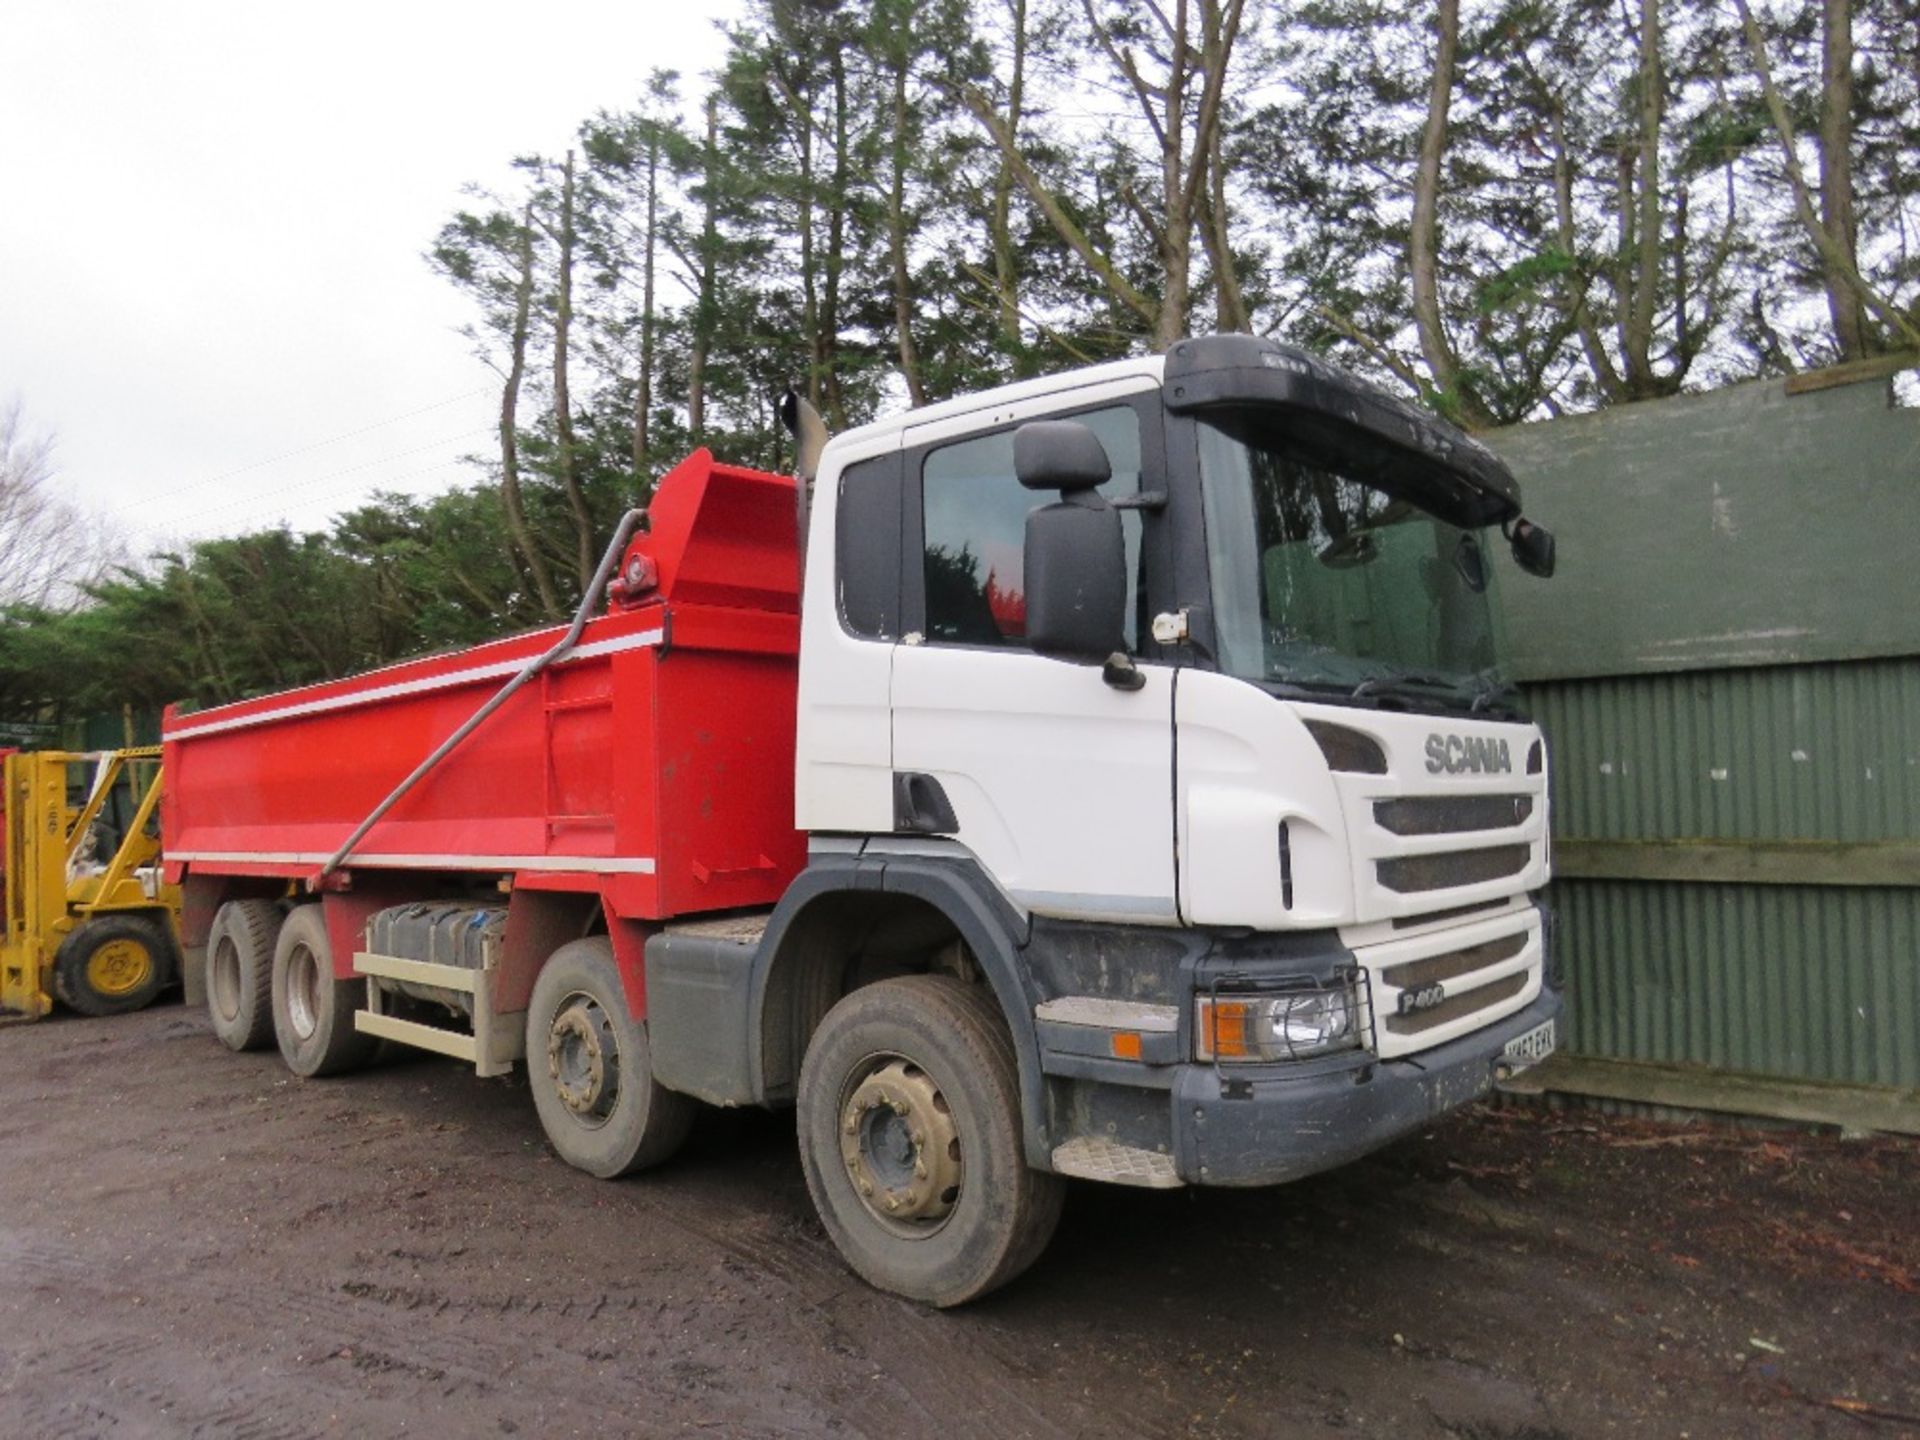 SCANIA P400 8X4 TIPPER LORRY REG:KM62 EHX. SEMI AUTO GEARBOX. 2013 REGISTERED. TESTED TILL MARCH 202 - Image 2 of 12